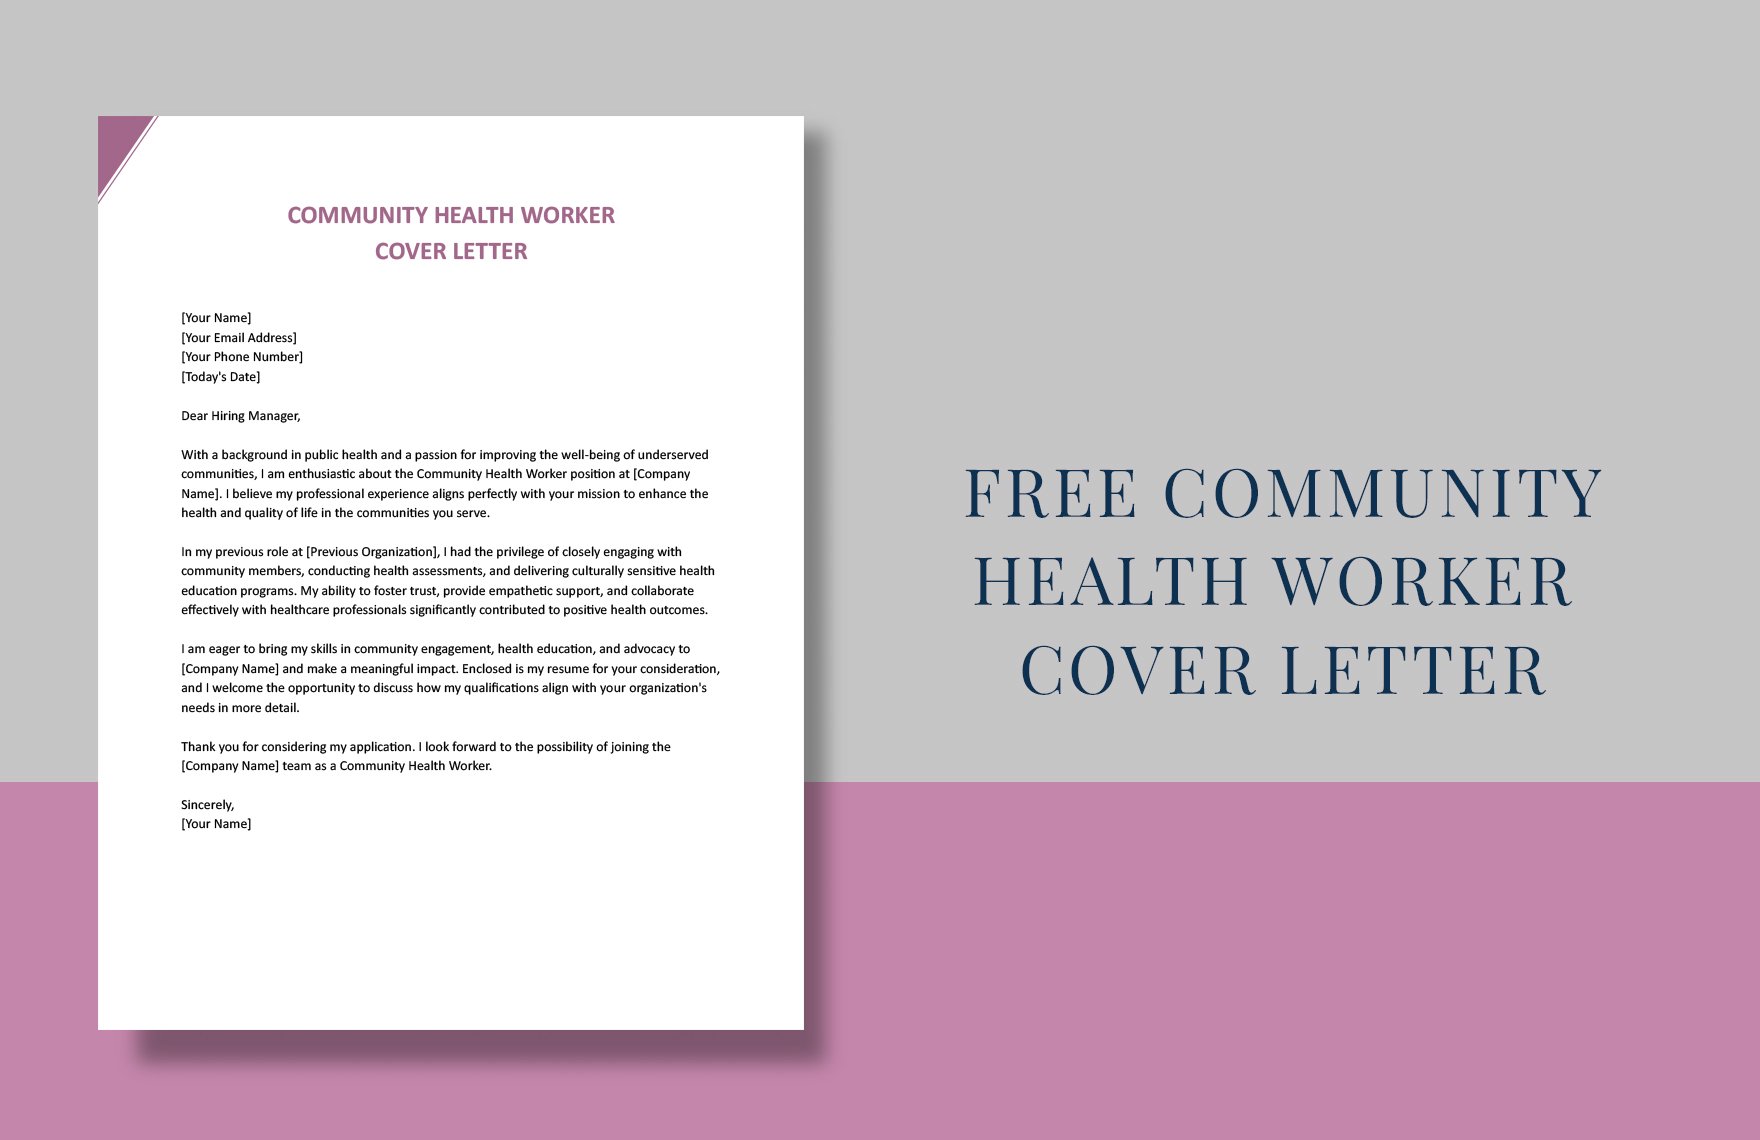 Community Health Worker Cover Letter in Word, Google Docs